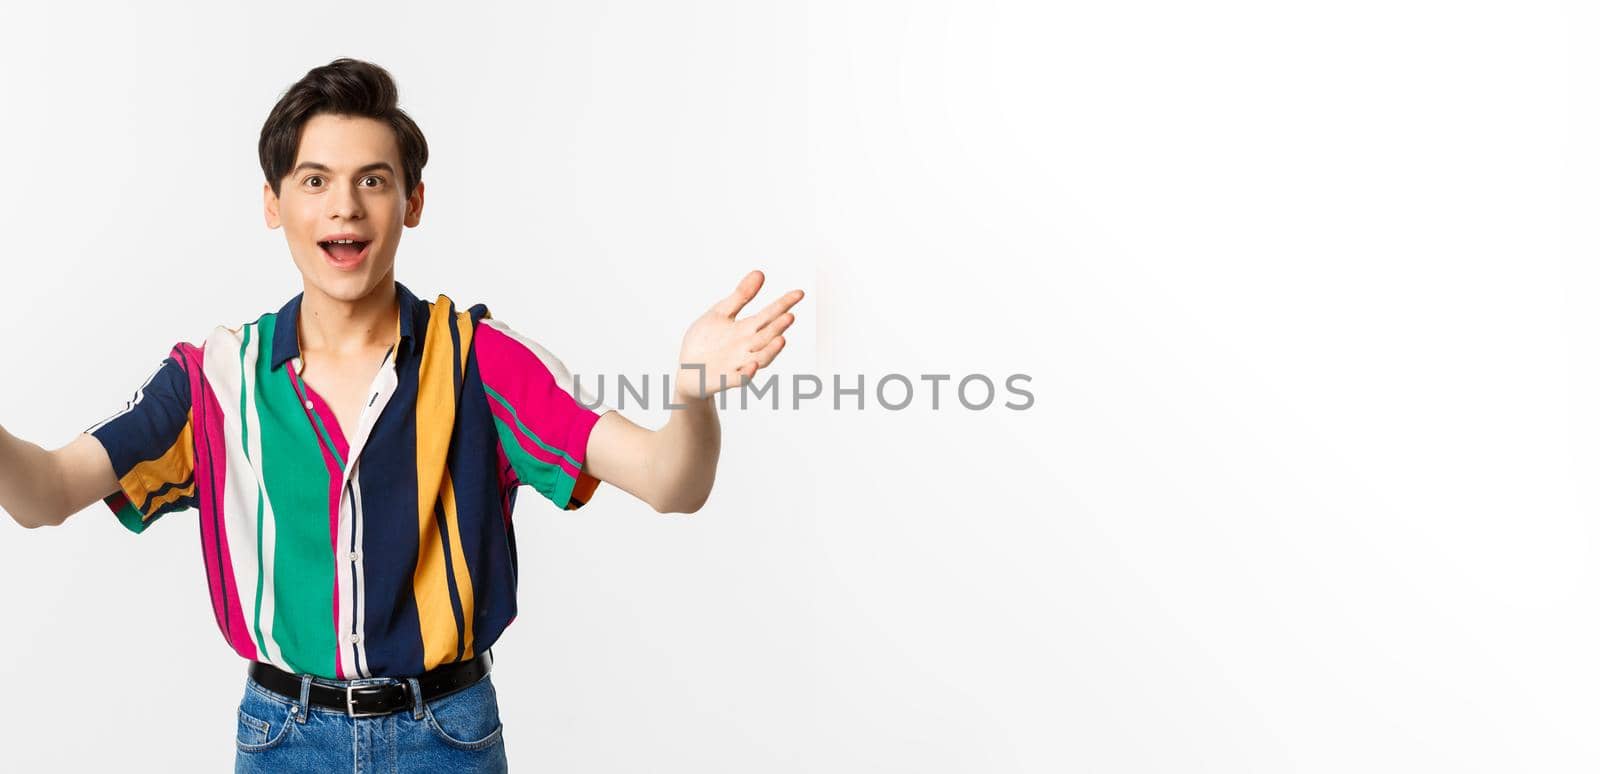 Amazed young handsome man reaching hands forward, want to hold or take something, looking with desire, standing over white background.